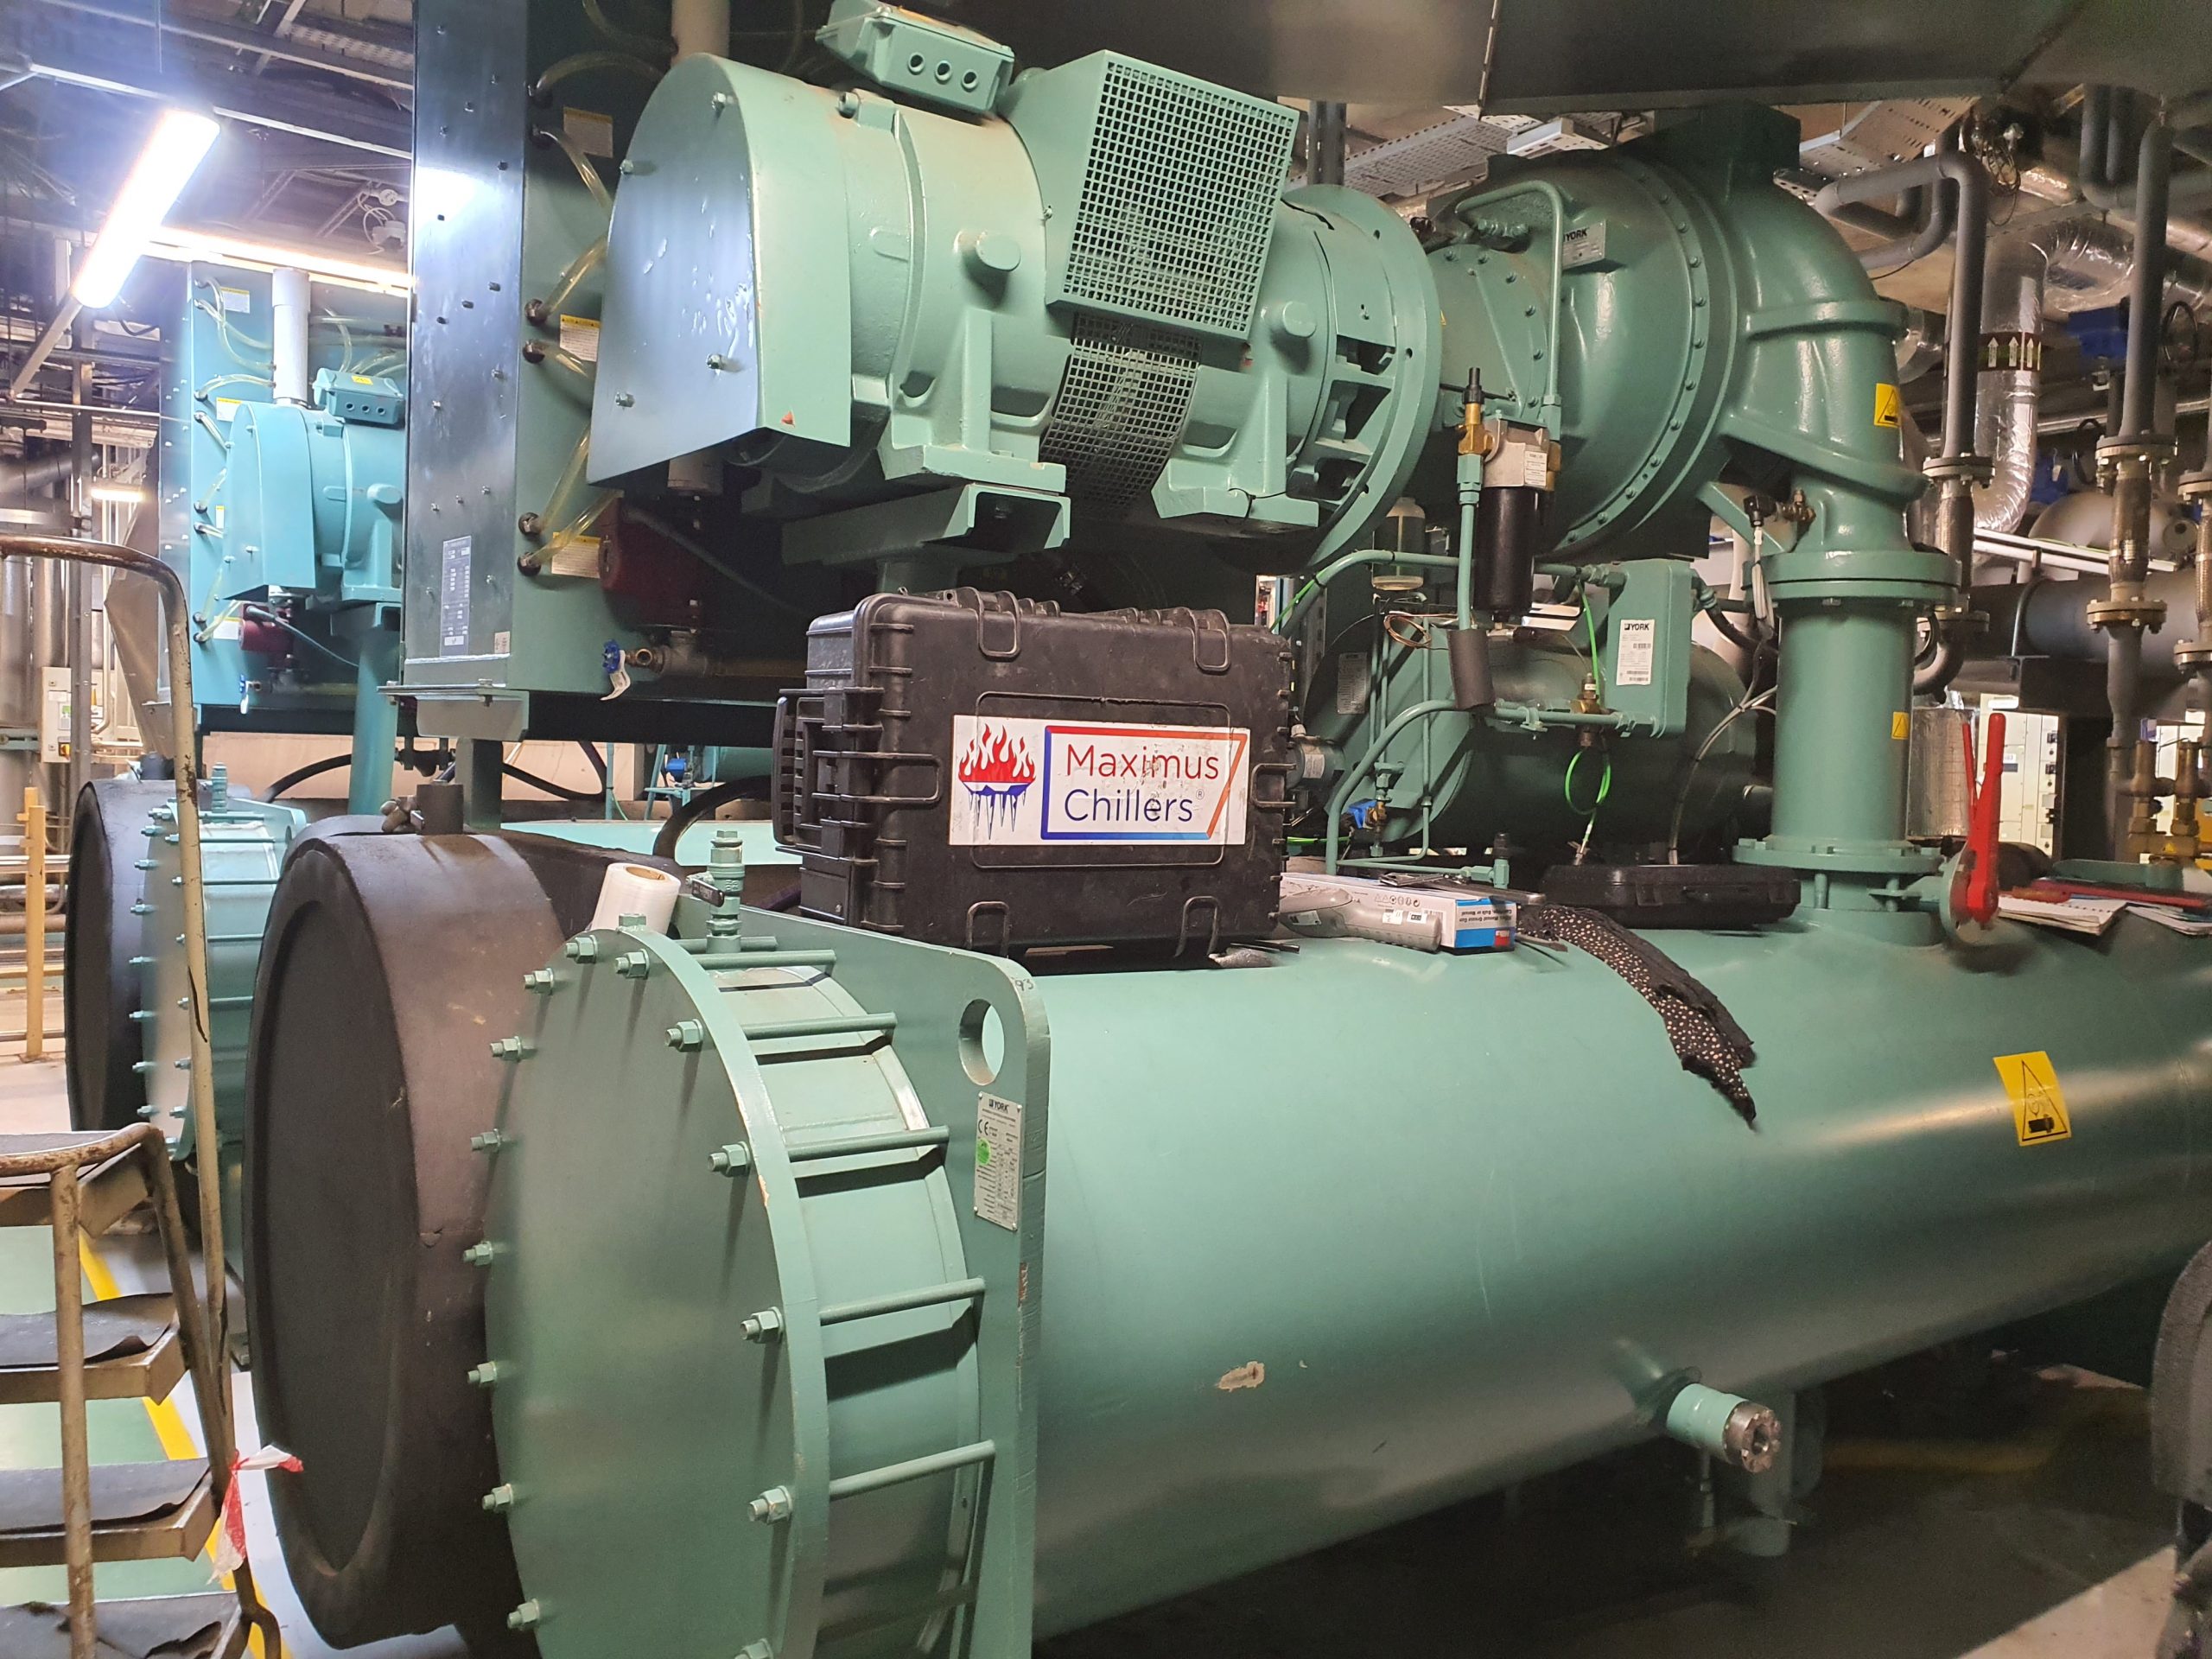 Plant room with row of 3 green centrifugal chillers for service, maintenance and repair